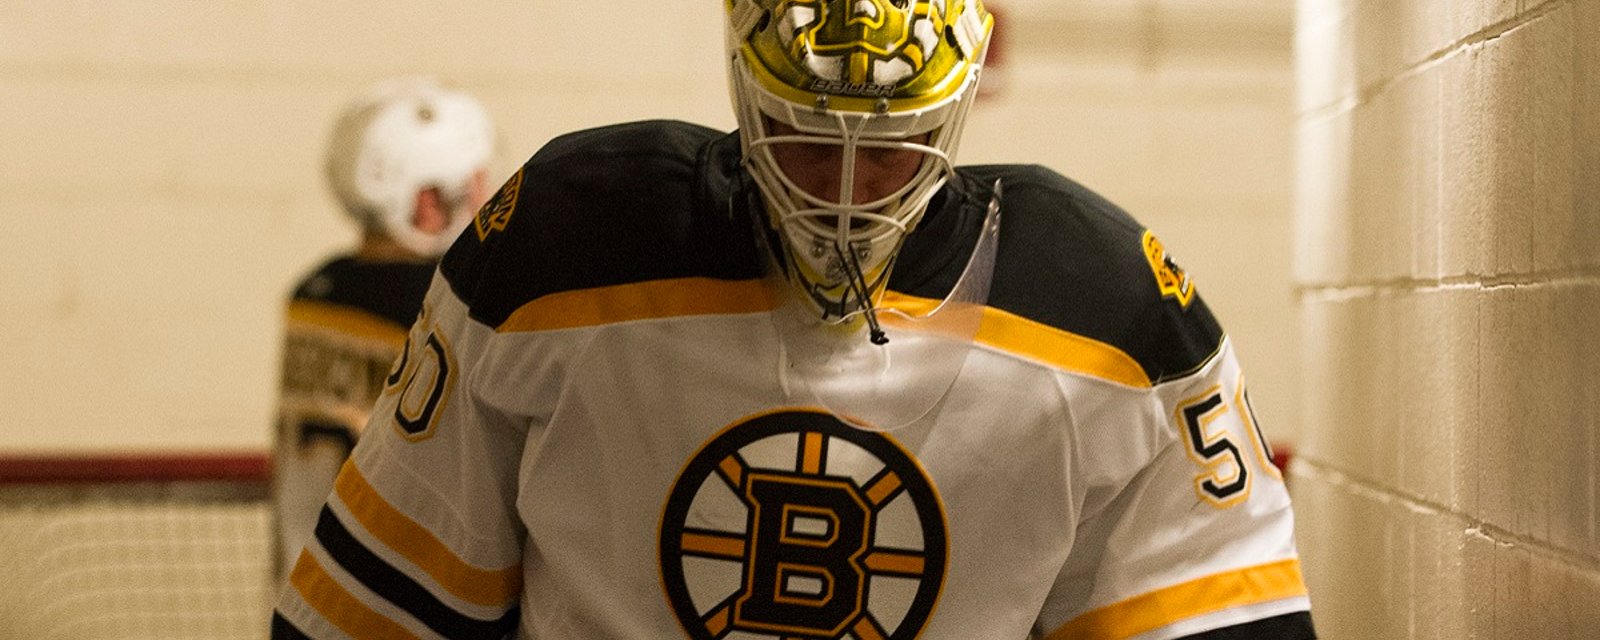 Bruins roster change is coming, but the team may still be undecided.